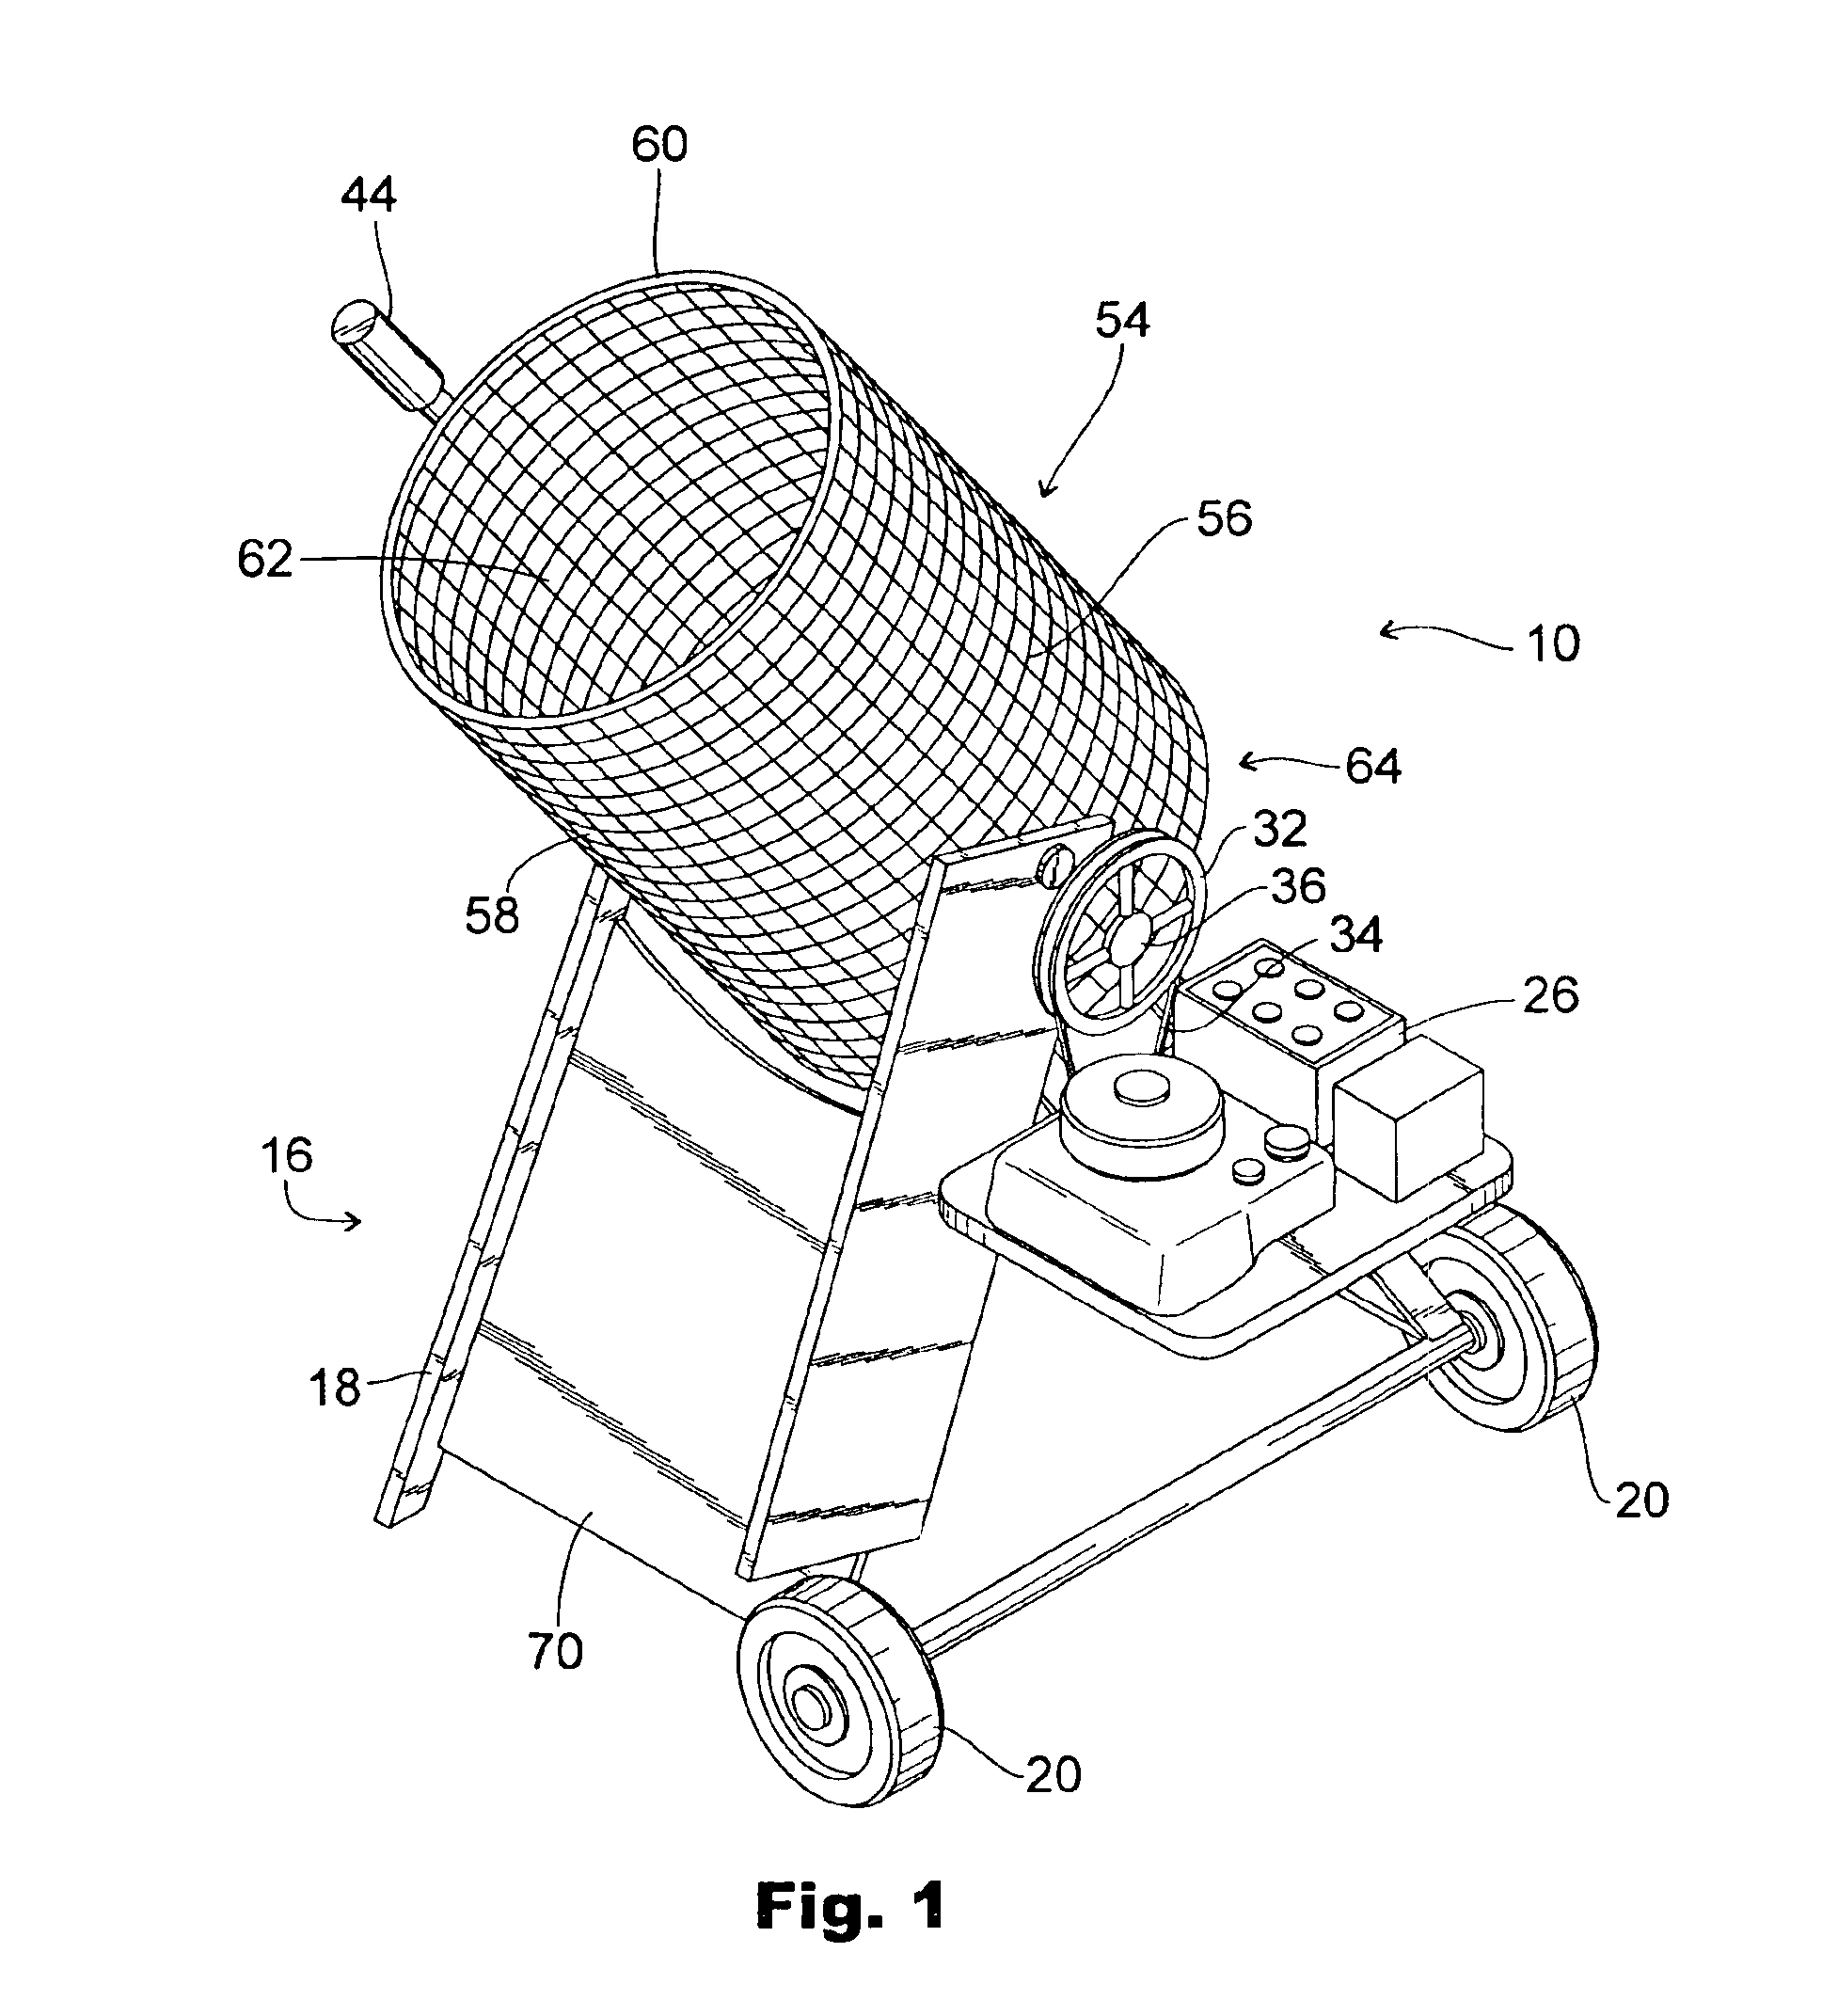 Garden screening device for sifting and sorting material